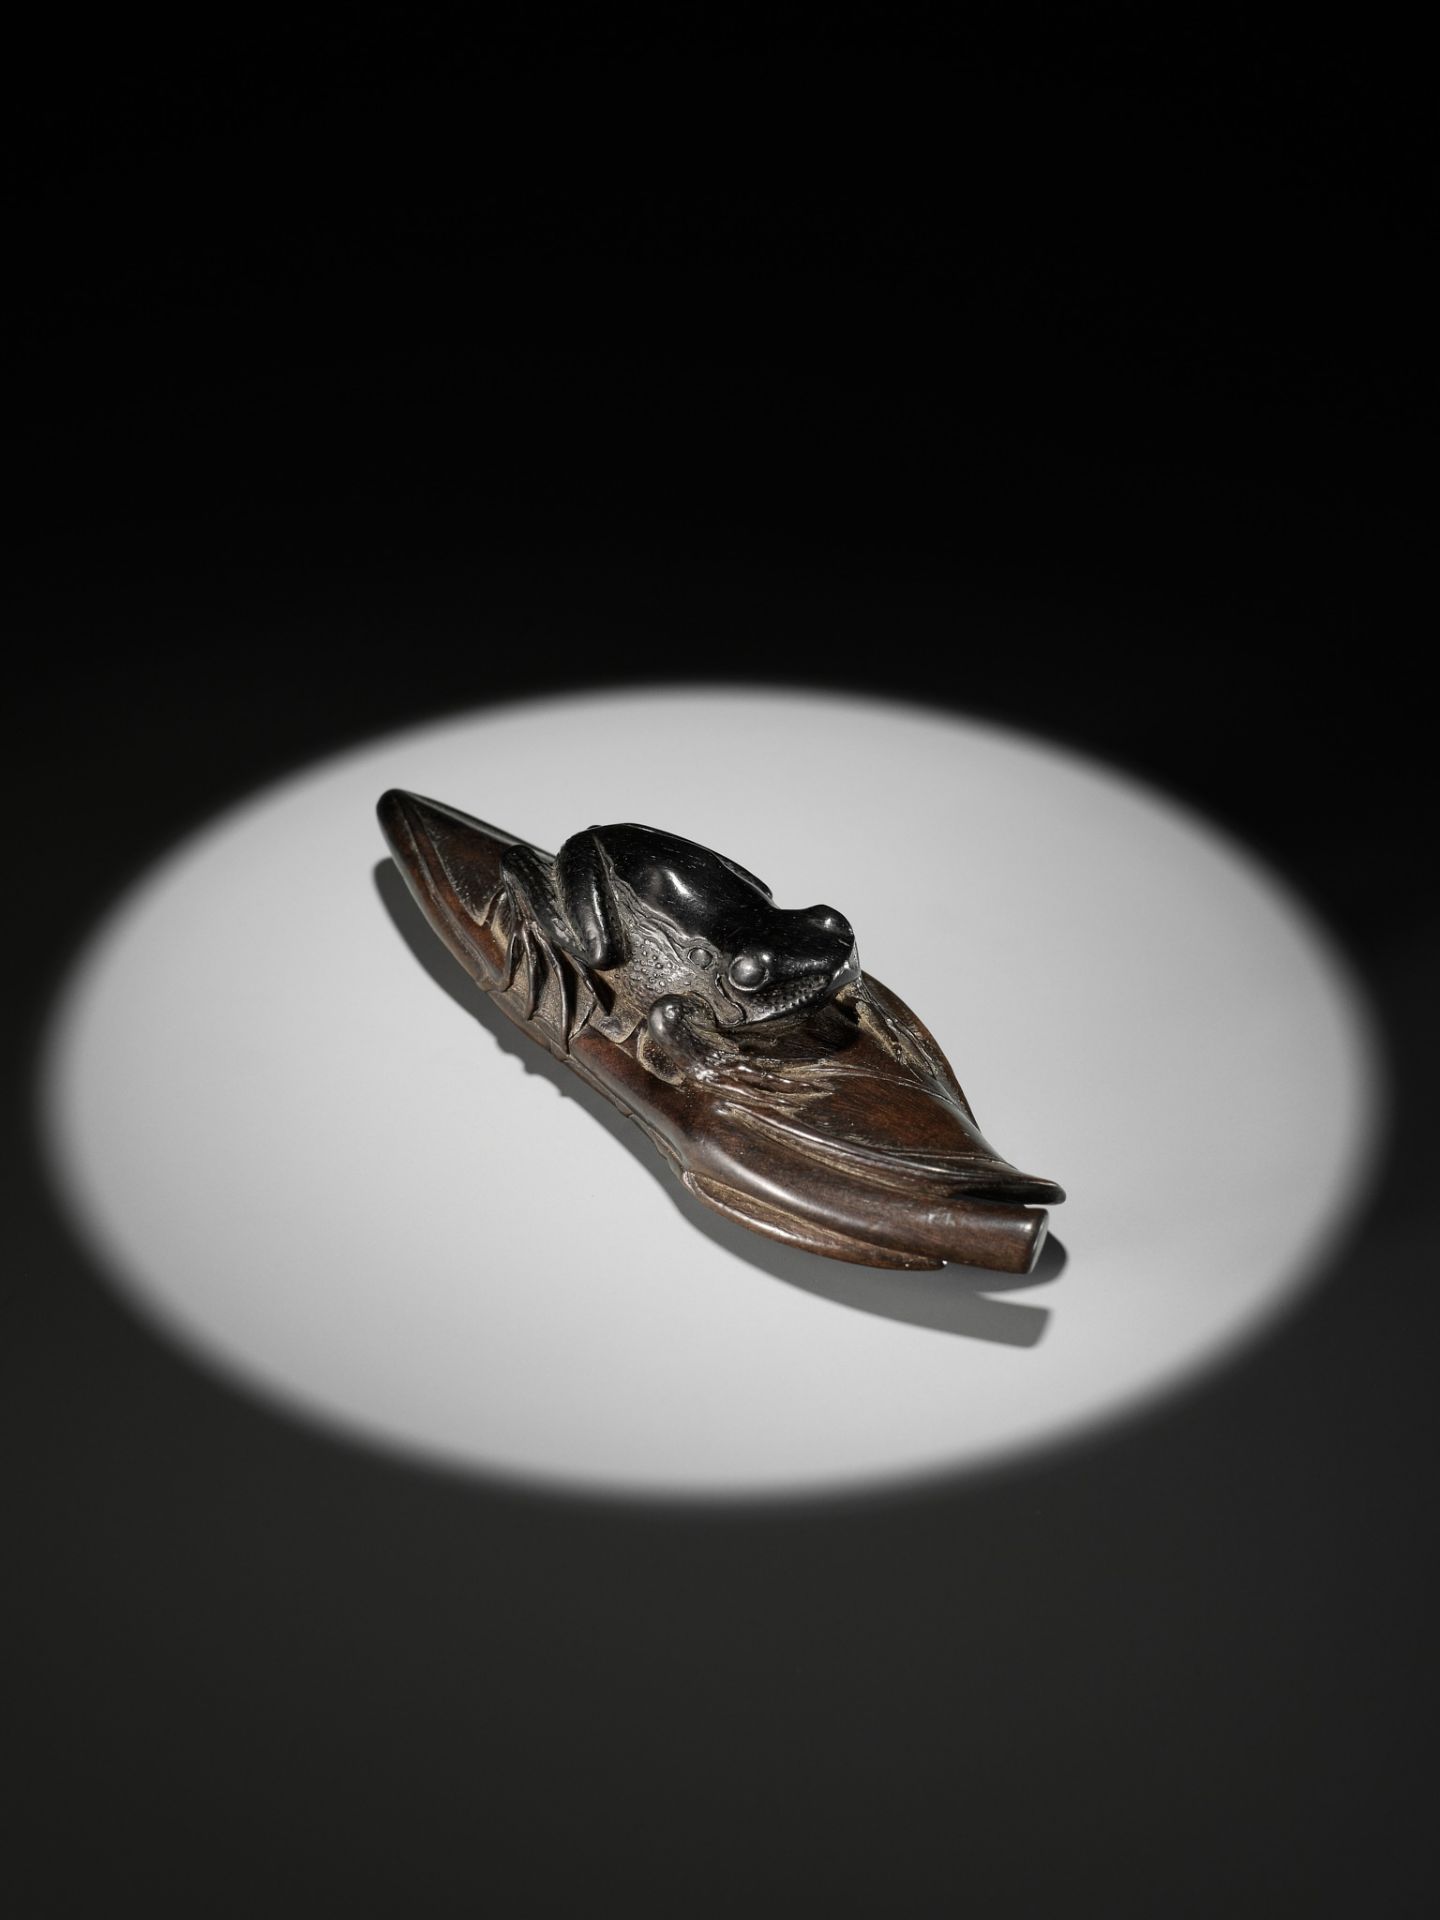 KANMAN: AN EXCEPTIONAL AND LARGE KUROGAKI (BLACK PERSIMMON) WOOD NETSUKE OF A FROG ON A LOTUS LEAF - Image 15 of 20